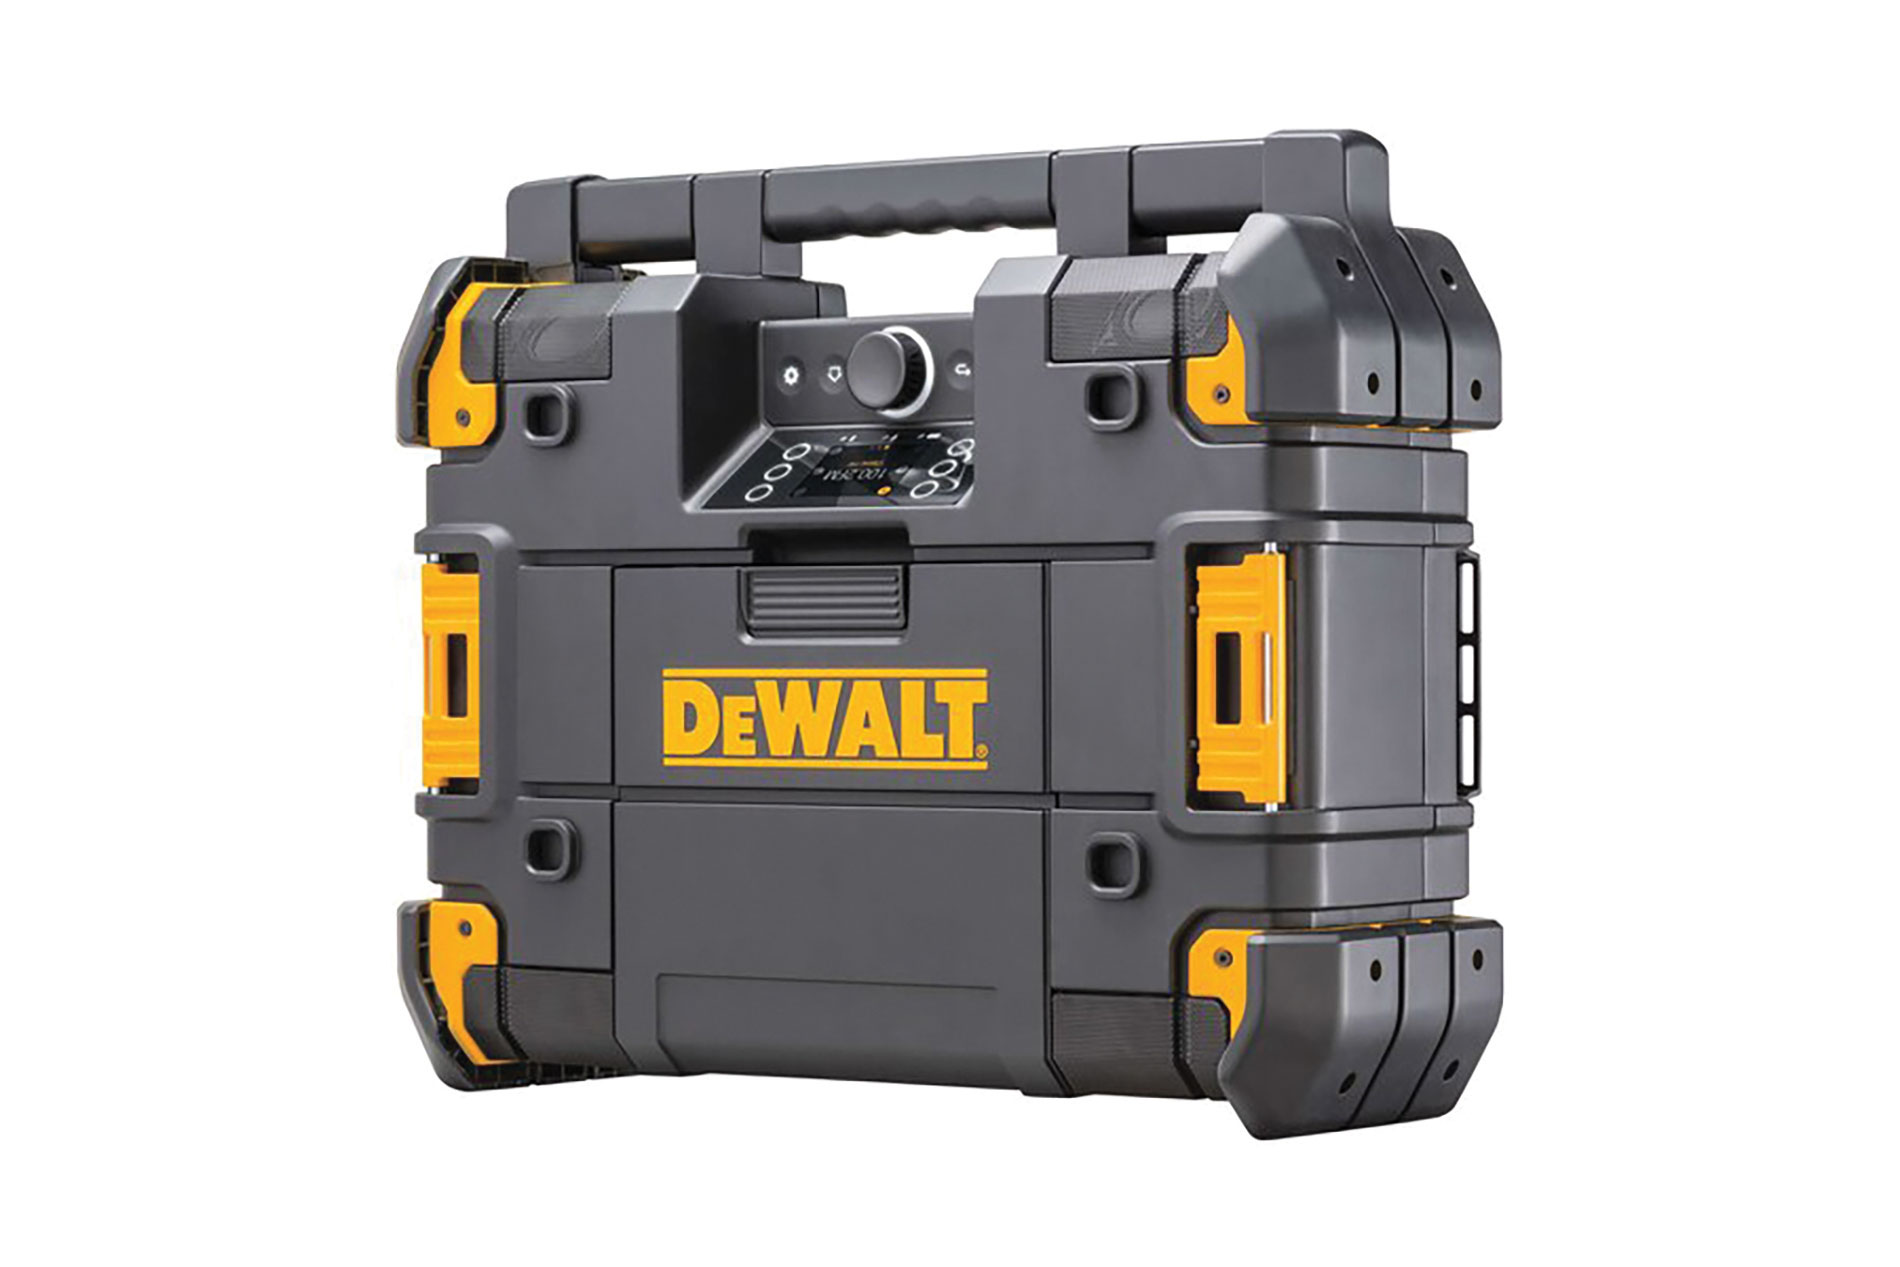 Large gray radio case with yellow accents and yellow DeWalt logo. Image by DeWalt.